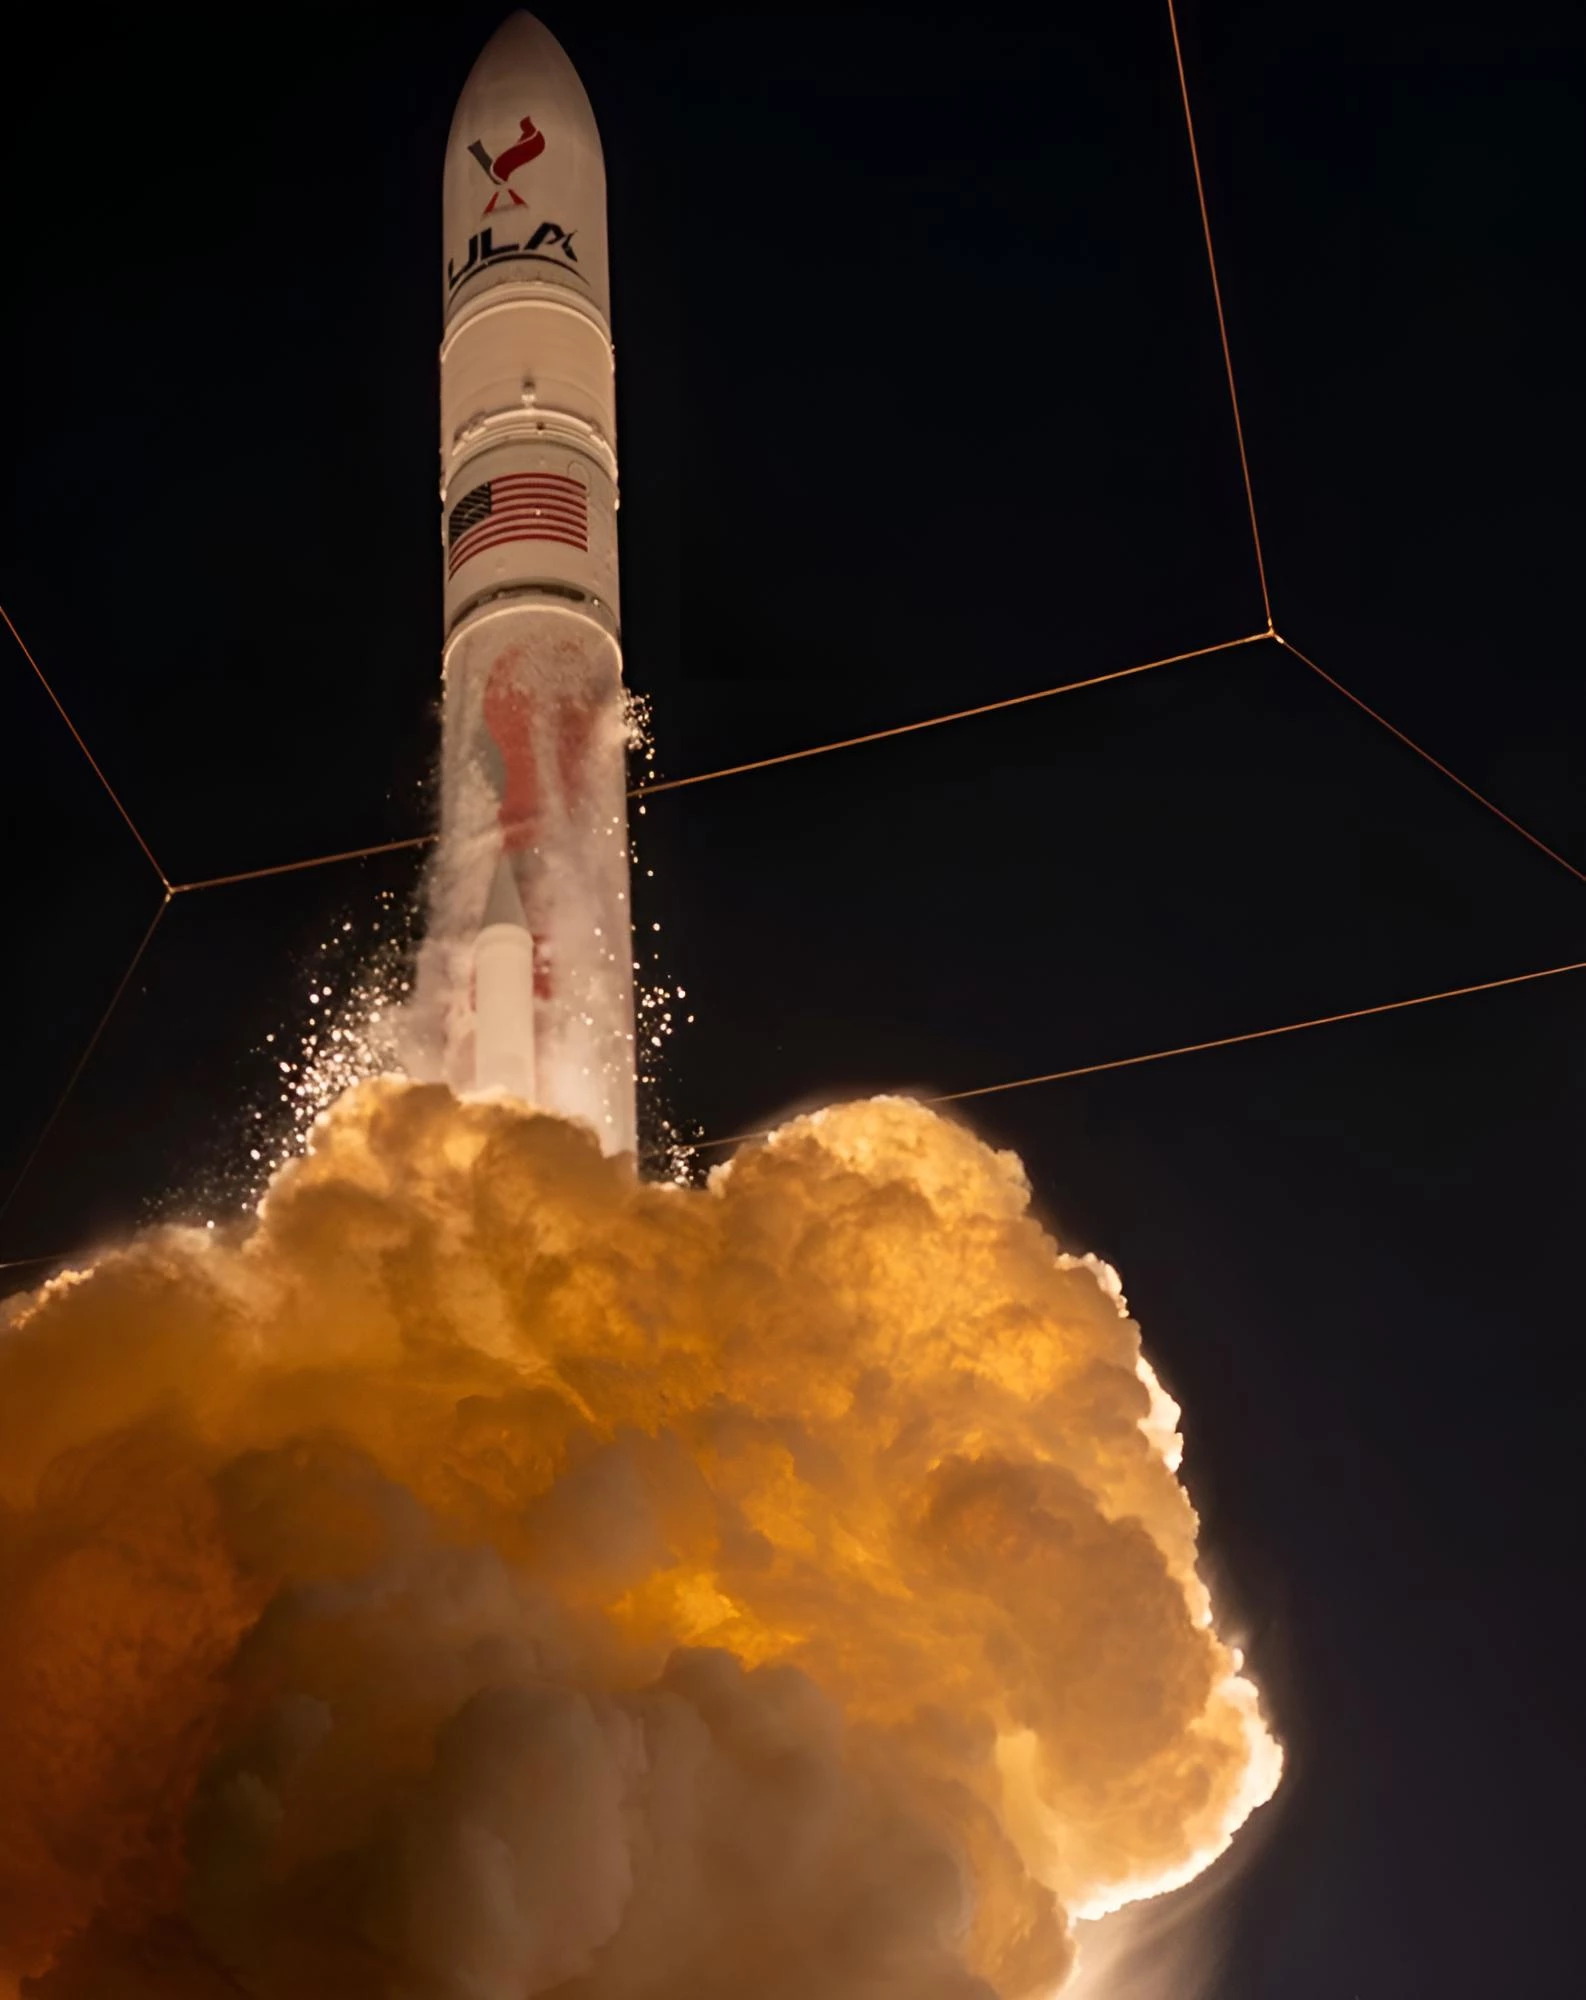 ULA’s Vulcan rocket launches moon lander on first mission